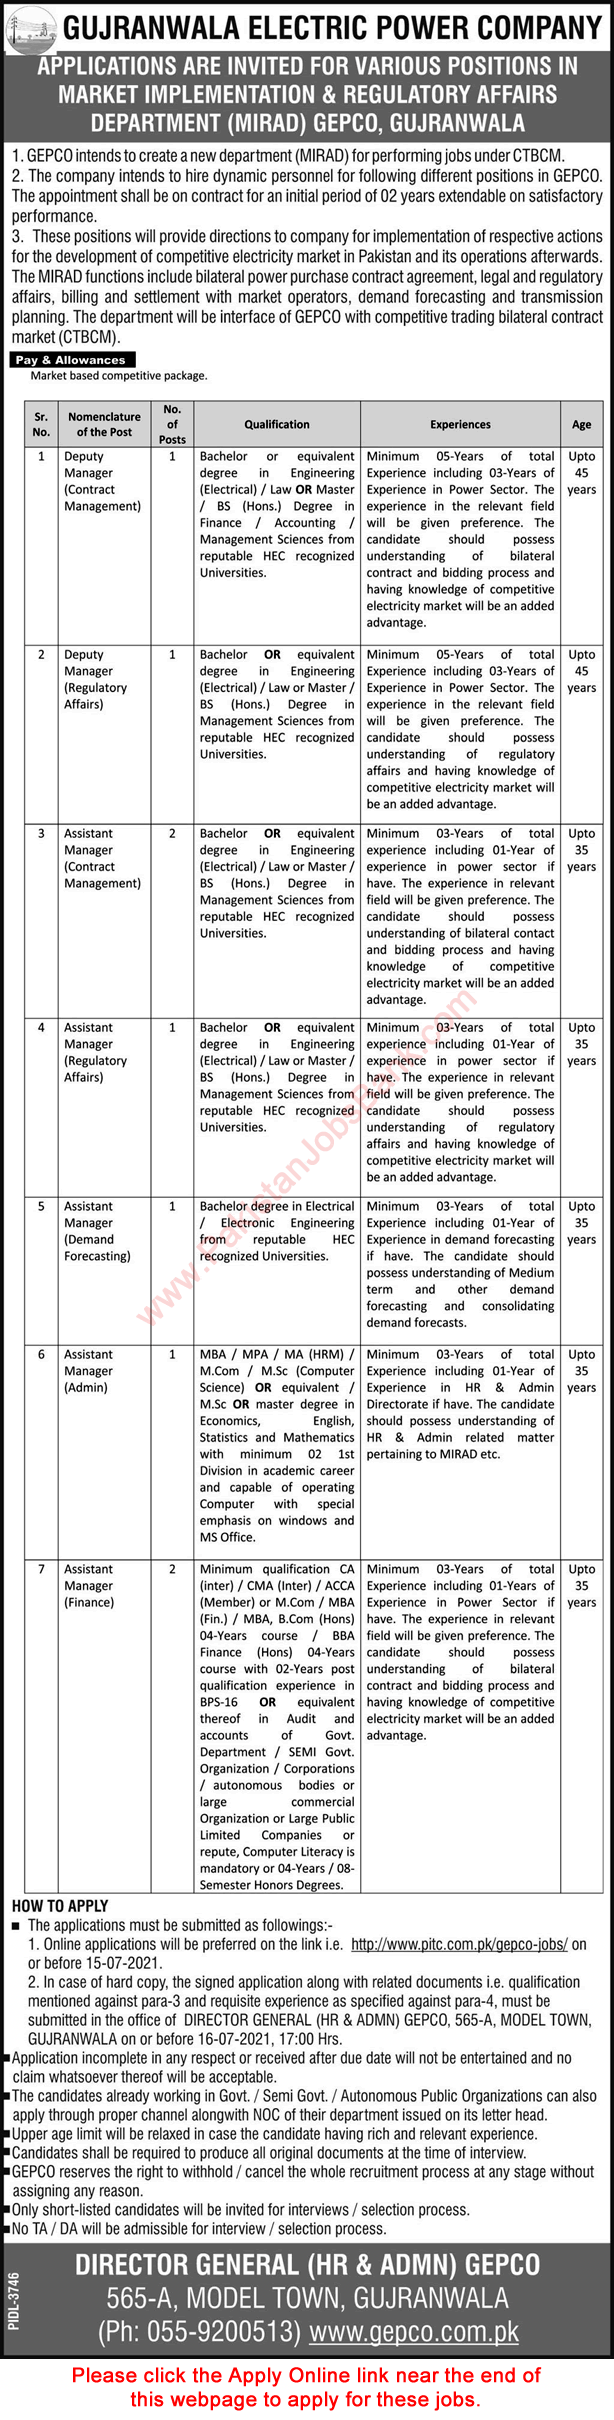 GEPCO Jobs 2021 July WAPDA Application Form Deputy / Assistant Managers Latest